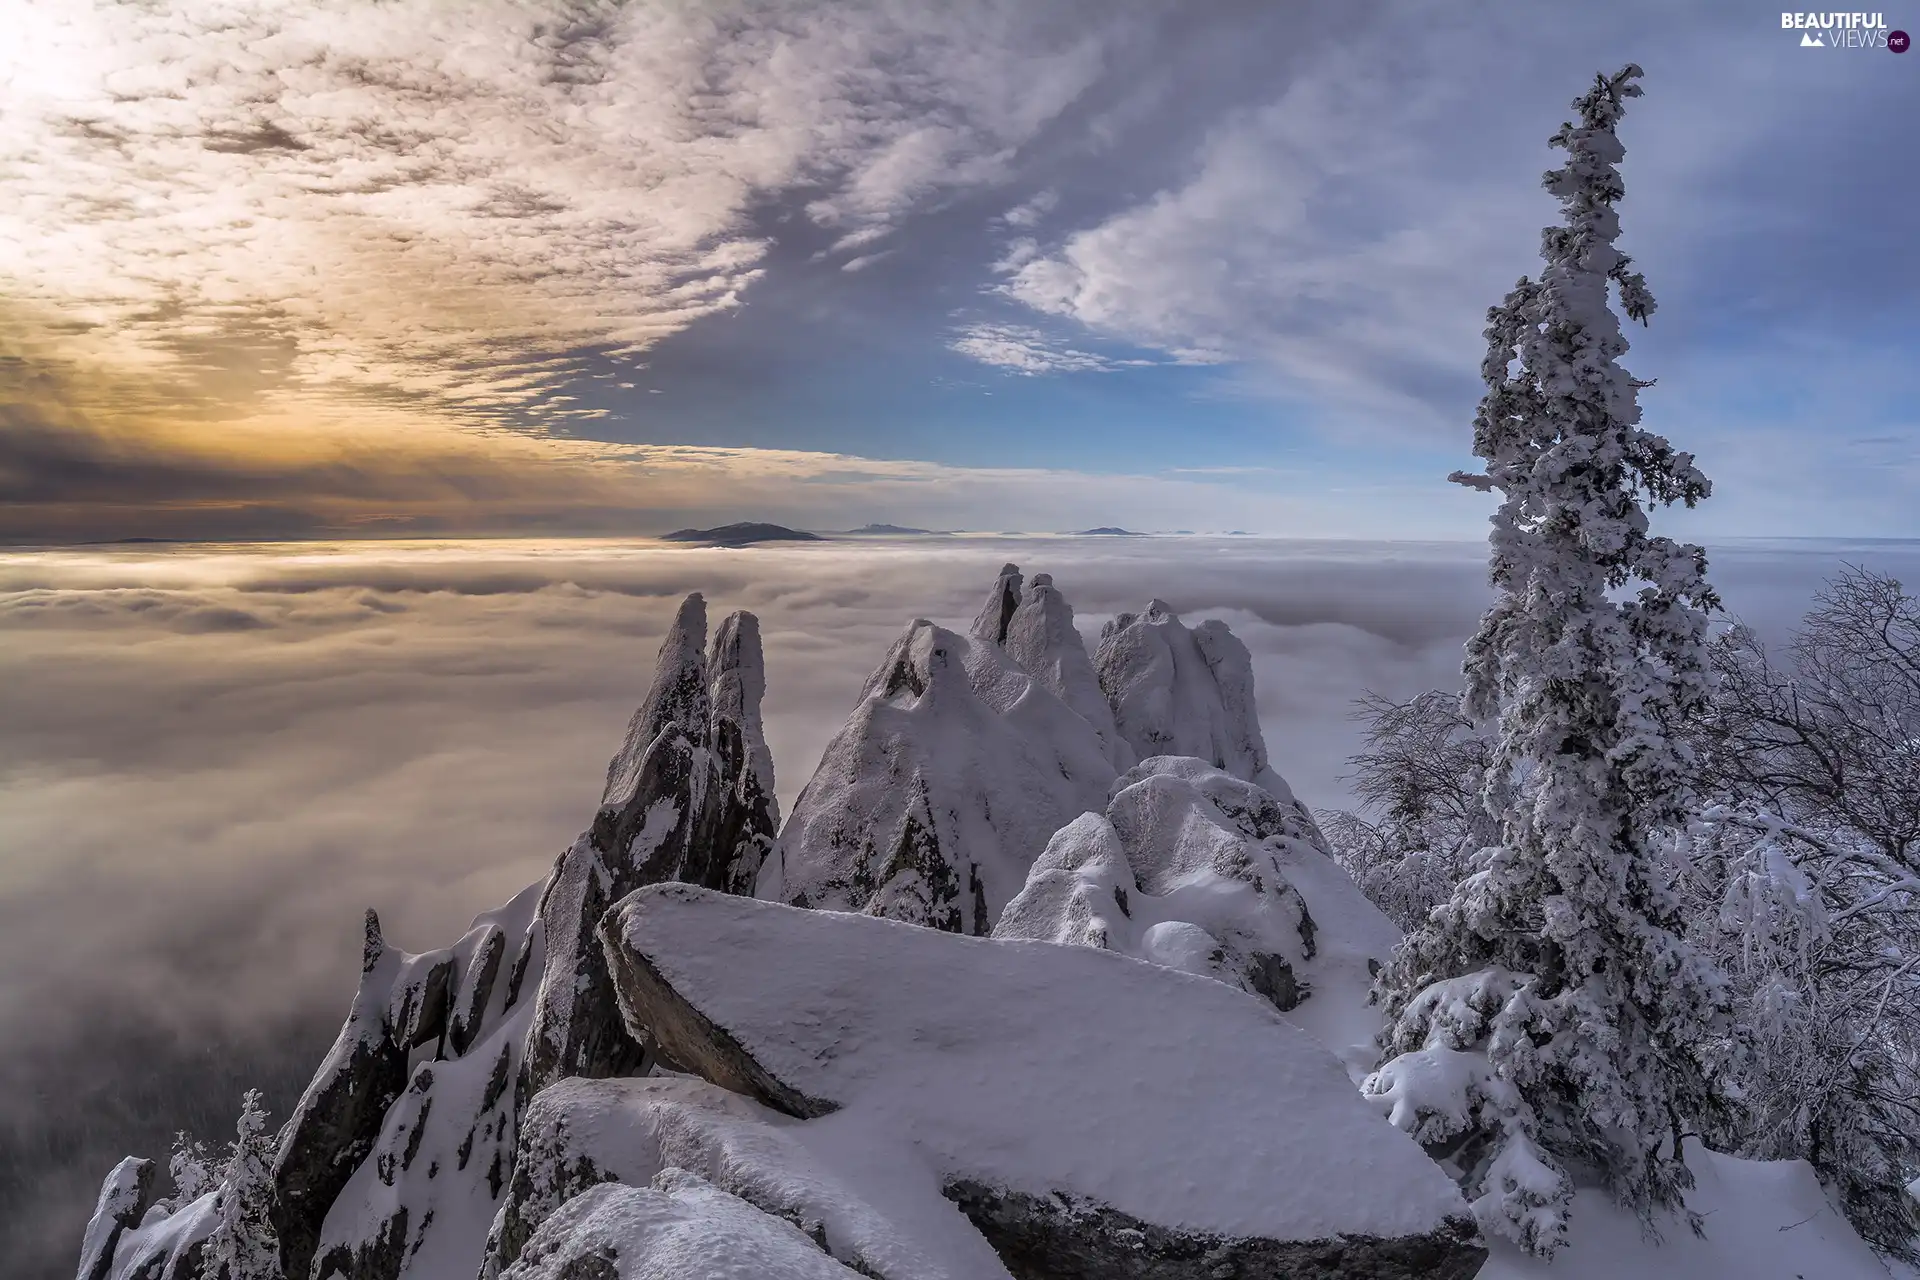 rocks, trees, winter, viewes, Fog, Snowy, Mountains, clouds